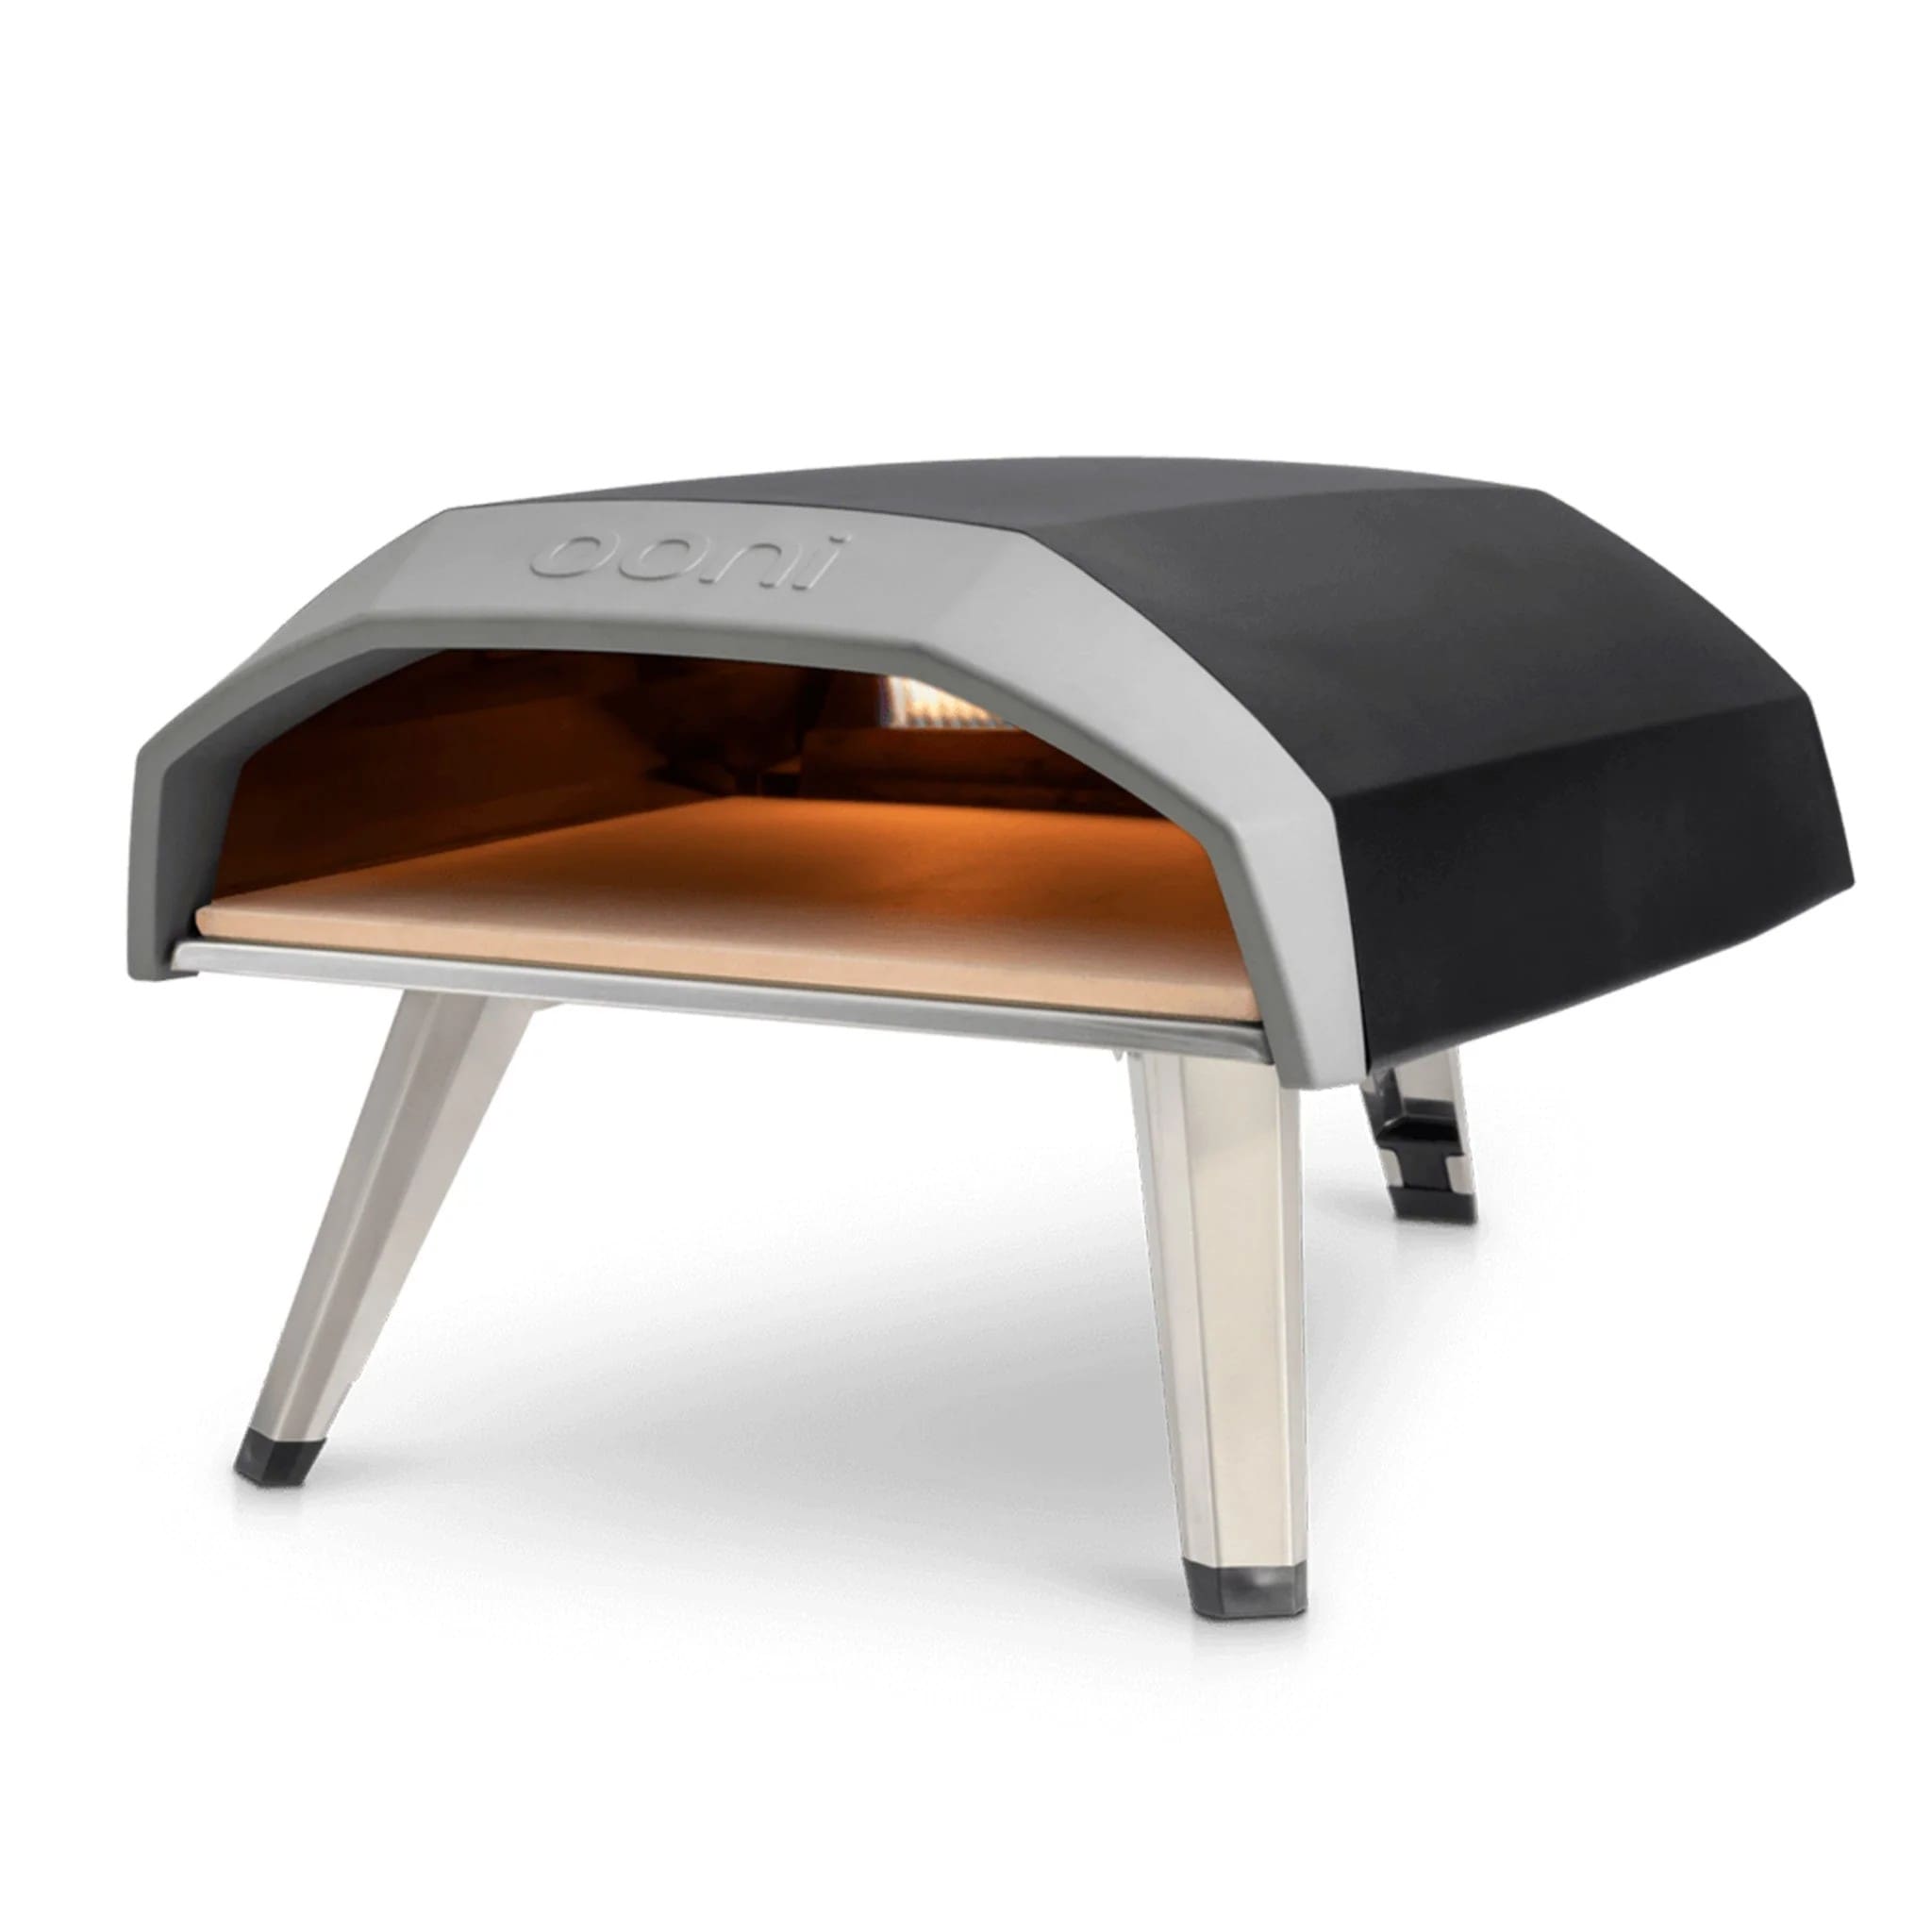 Ooni Koda 12 Portable Gas Fired Pizza Oven